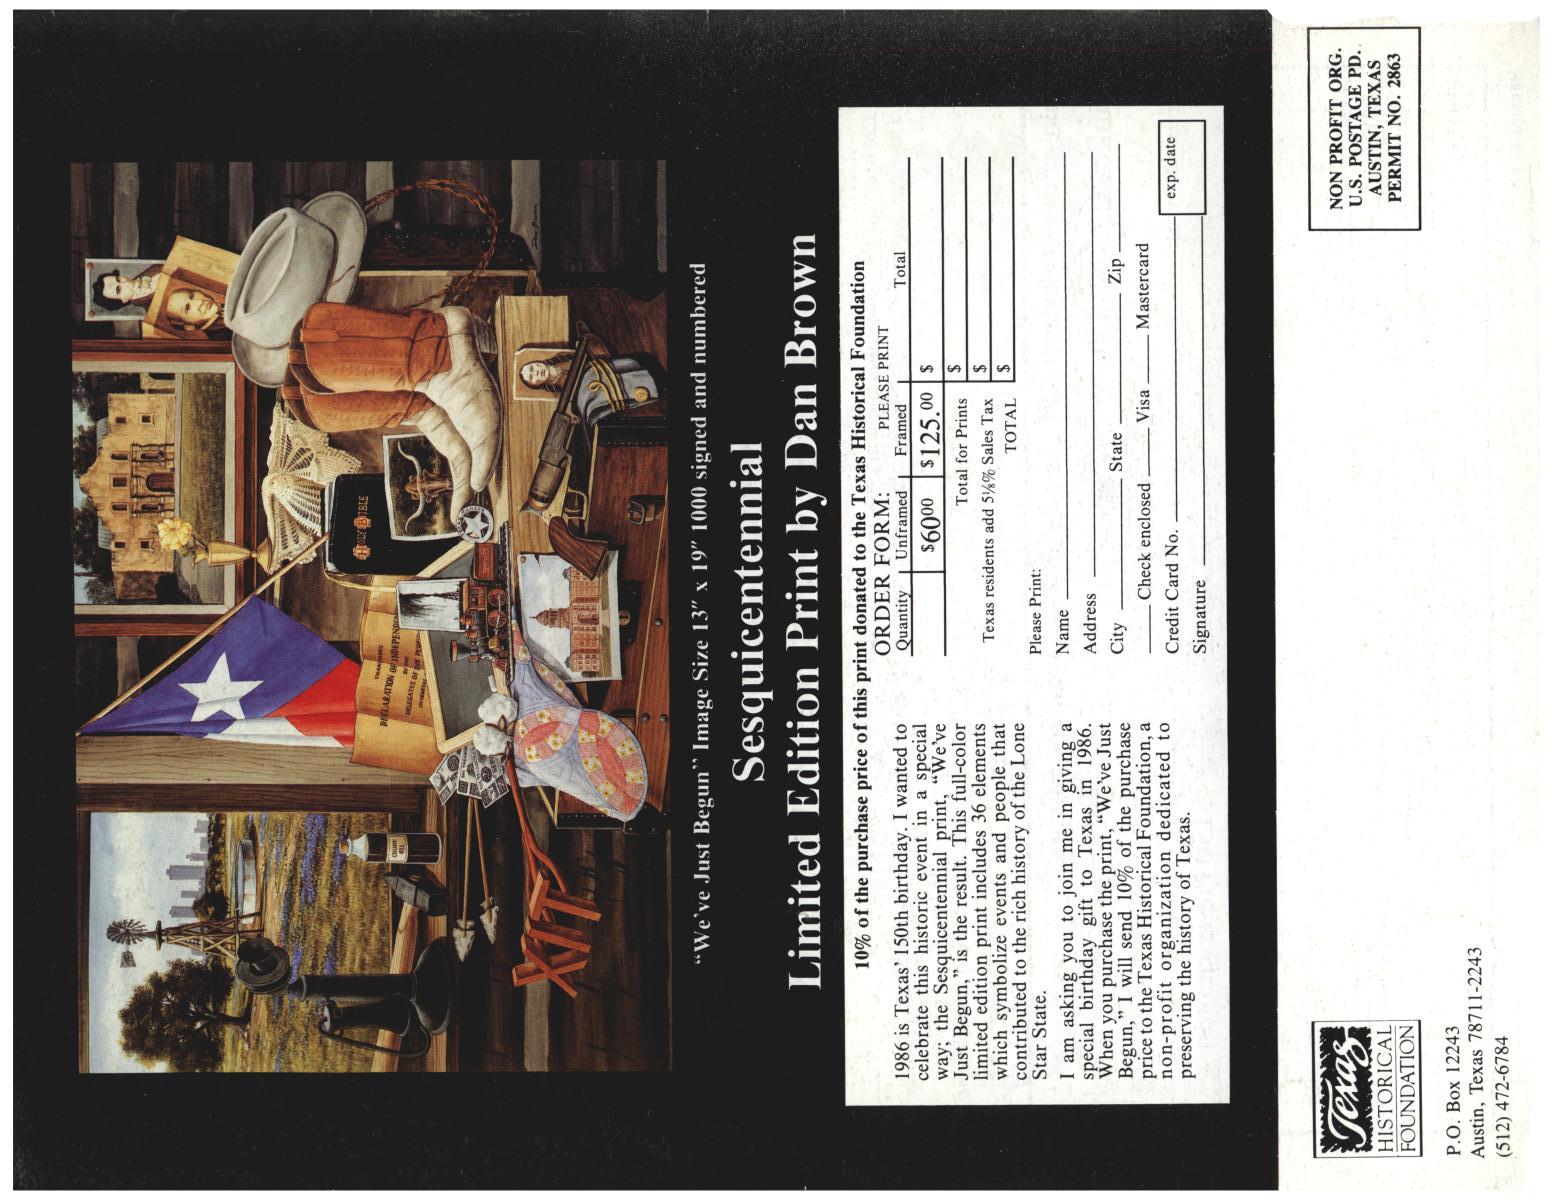 Heritage, Volume 2, Number 4, Fall 1985
                                                
                                                    Back Cover
                                                